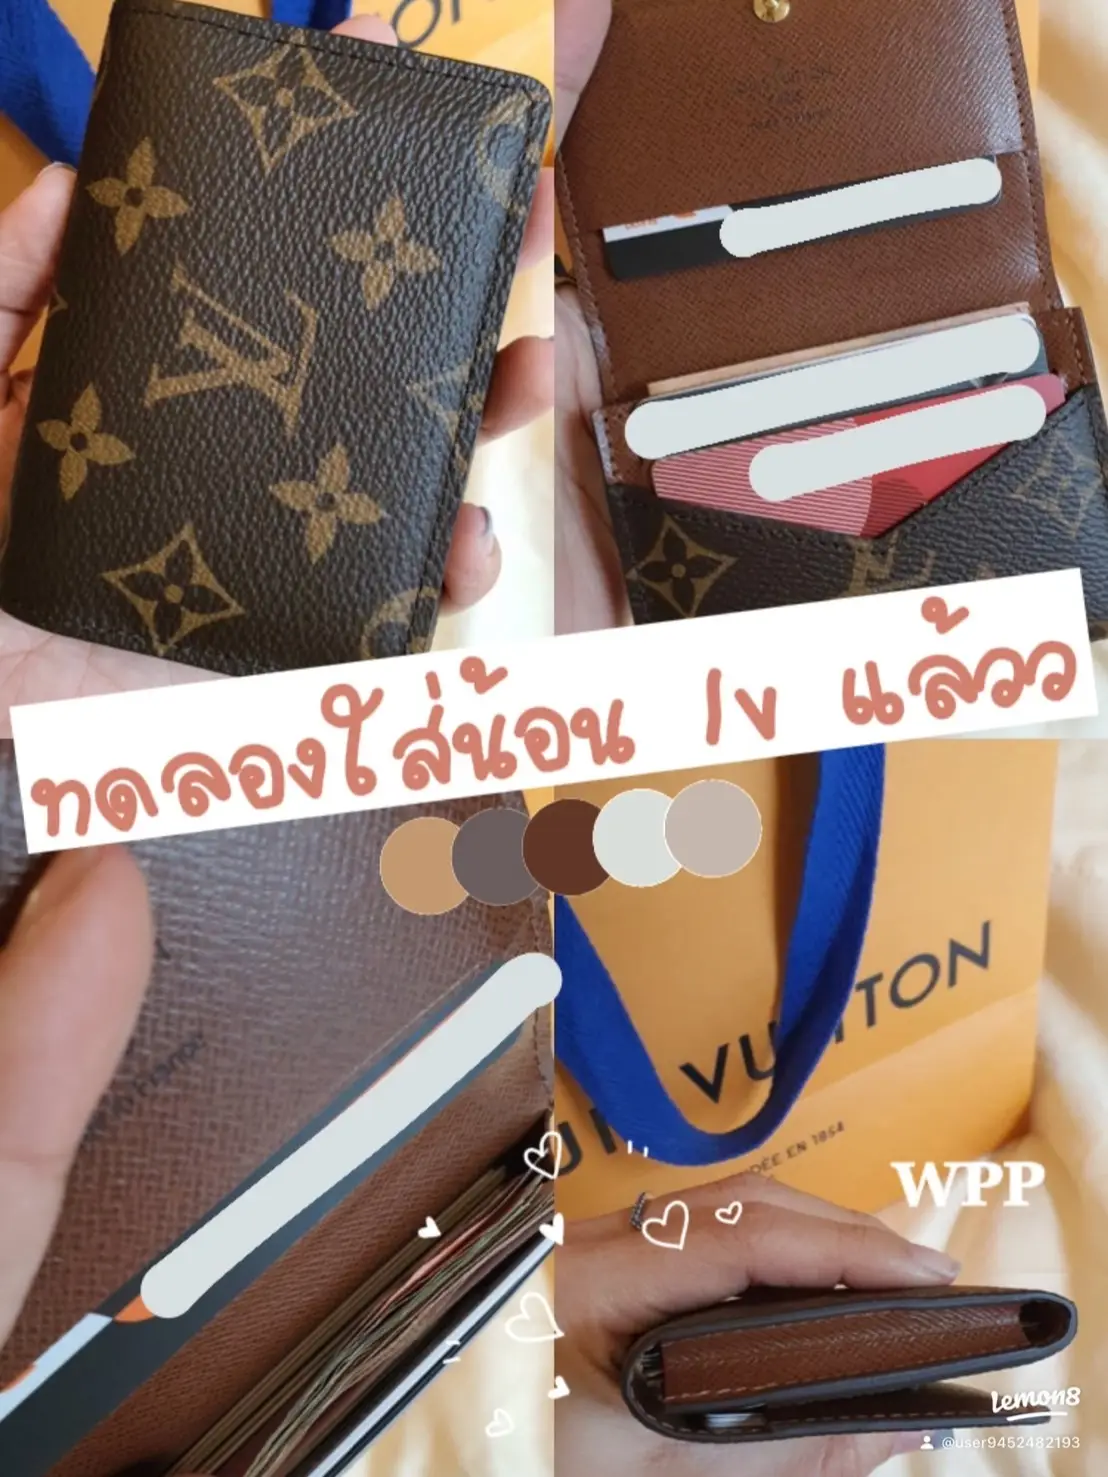 Hello I'm selling louis vuitton wallet never used - Depop